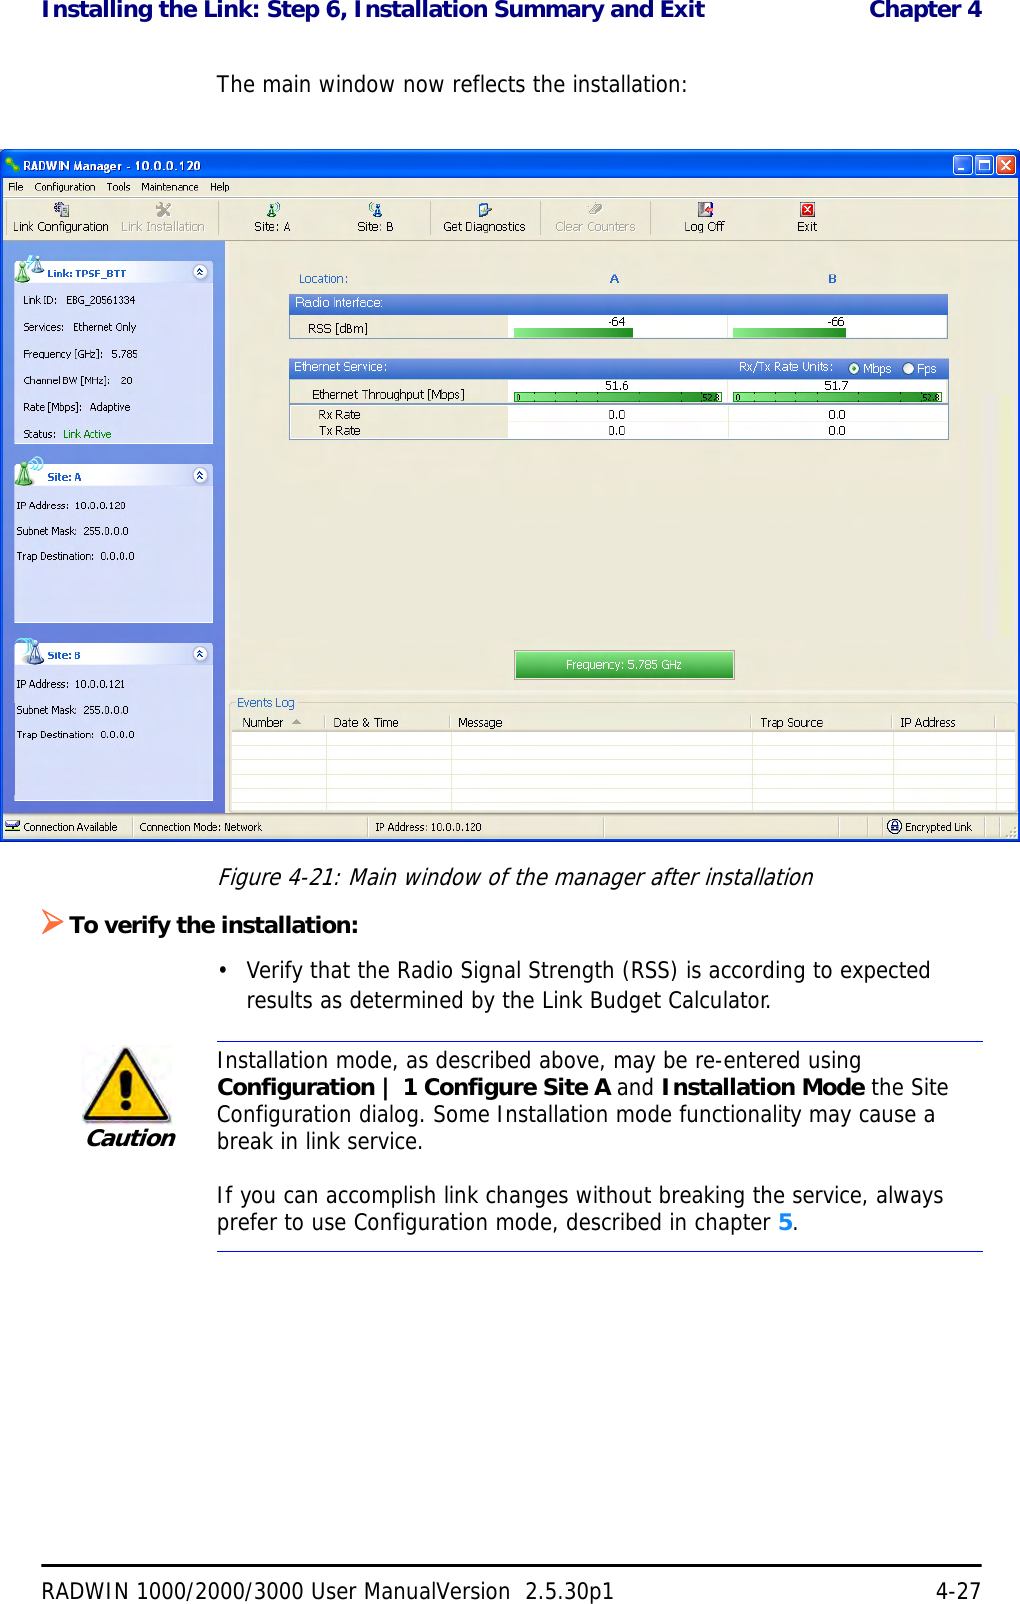 Installing the Link: Step 6, Installation Summary and Exit  Chapter 4RADWIN 1000/2000/3000 User ManualVersion  2.5.30p1 4-27The main window now reflects the installation:Figure 4-21: Main window of the manager after installation ¾To verify the installation:• Verify that the Radio Signal Strength (RSS) is according to expected results as determined by the Link Budget Calculator.CautionInstallation mode, as described above, may be re-entered using Configuration | 1 Configure Site A and Installation Mode the Site Configuration dialog. Some Installation mode functionality may cause a break in link service.If you can accomplish link changes without breaking the service, always prefer to use Configuration mode, described in chapter 5. 